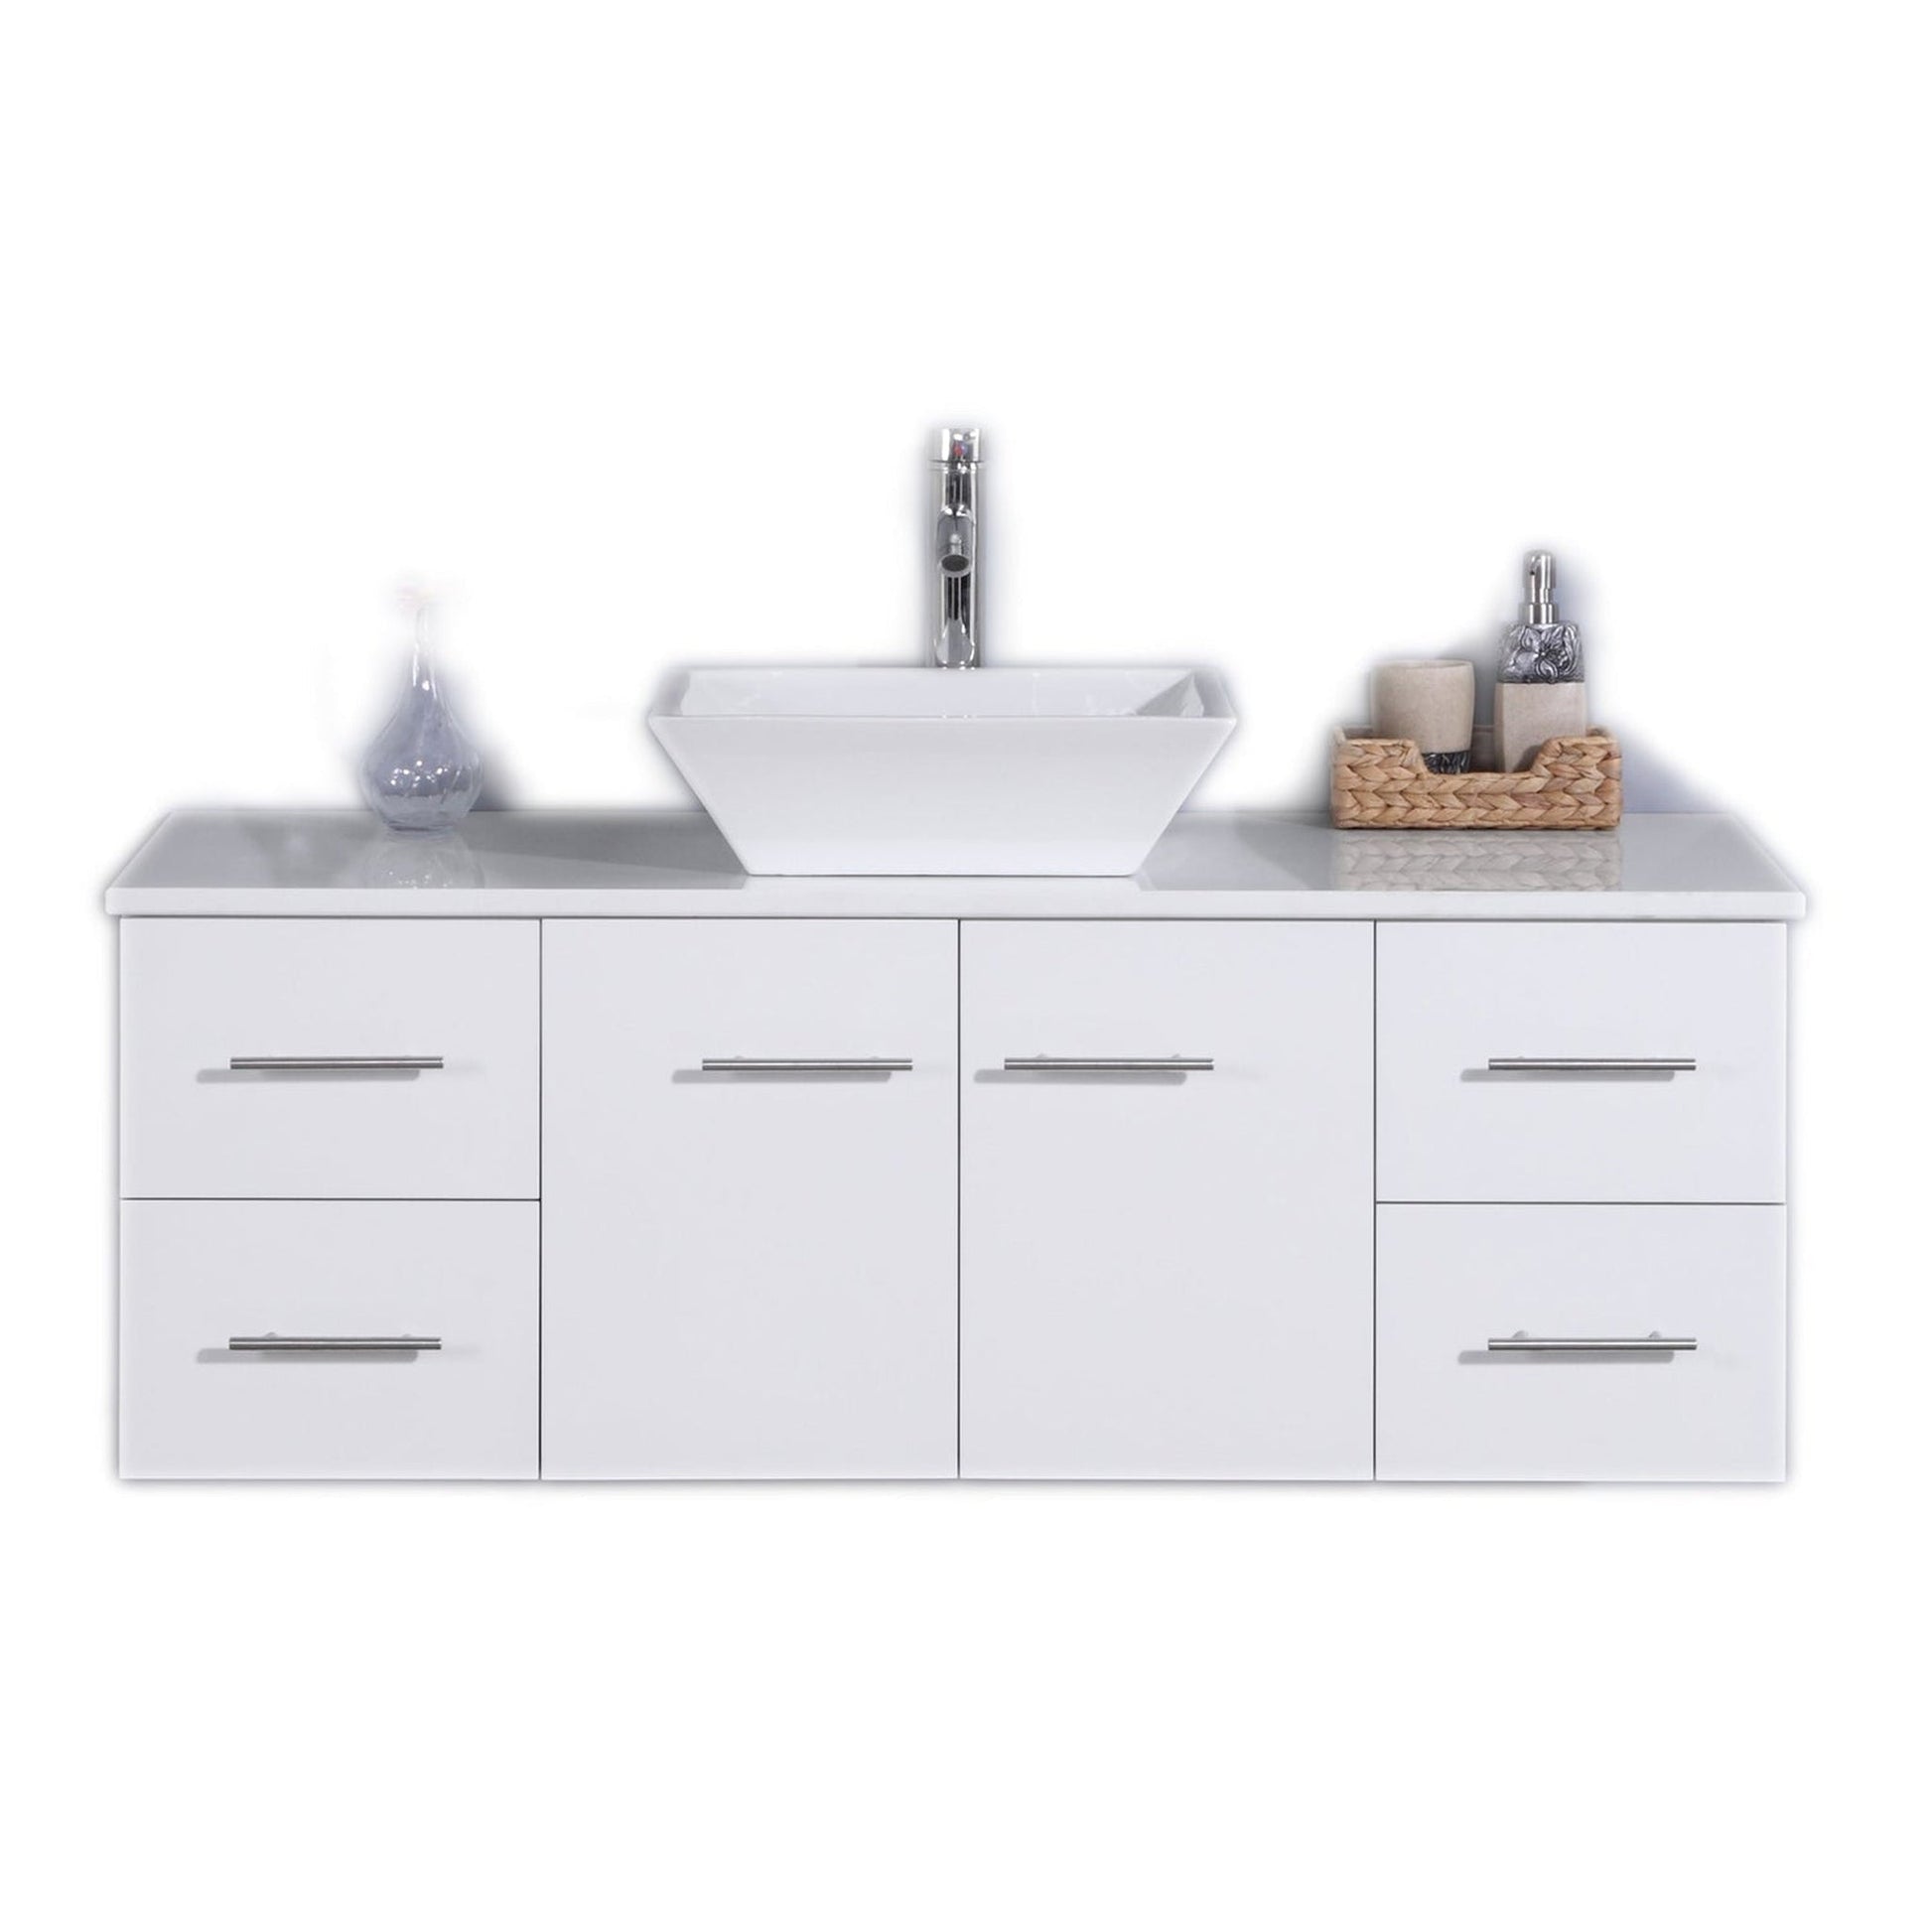 https://usbathstore.com/cdn/shop/products/Eviva-Totti-Wave-48-x-16-White-Wall-Mounted-Bathroom-Vanity-With-White-Man-Made-Stone-Countertop-and-Single-Porcelain-Sink.jpg?v=1678951954&width=1946